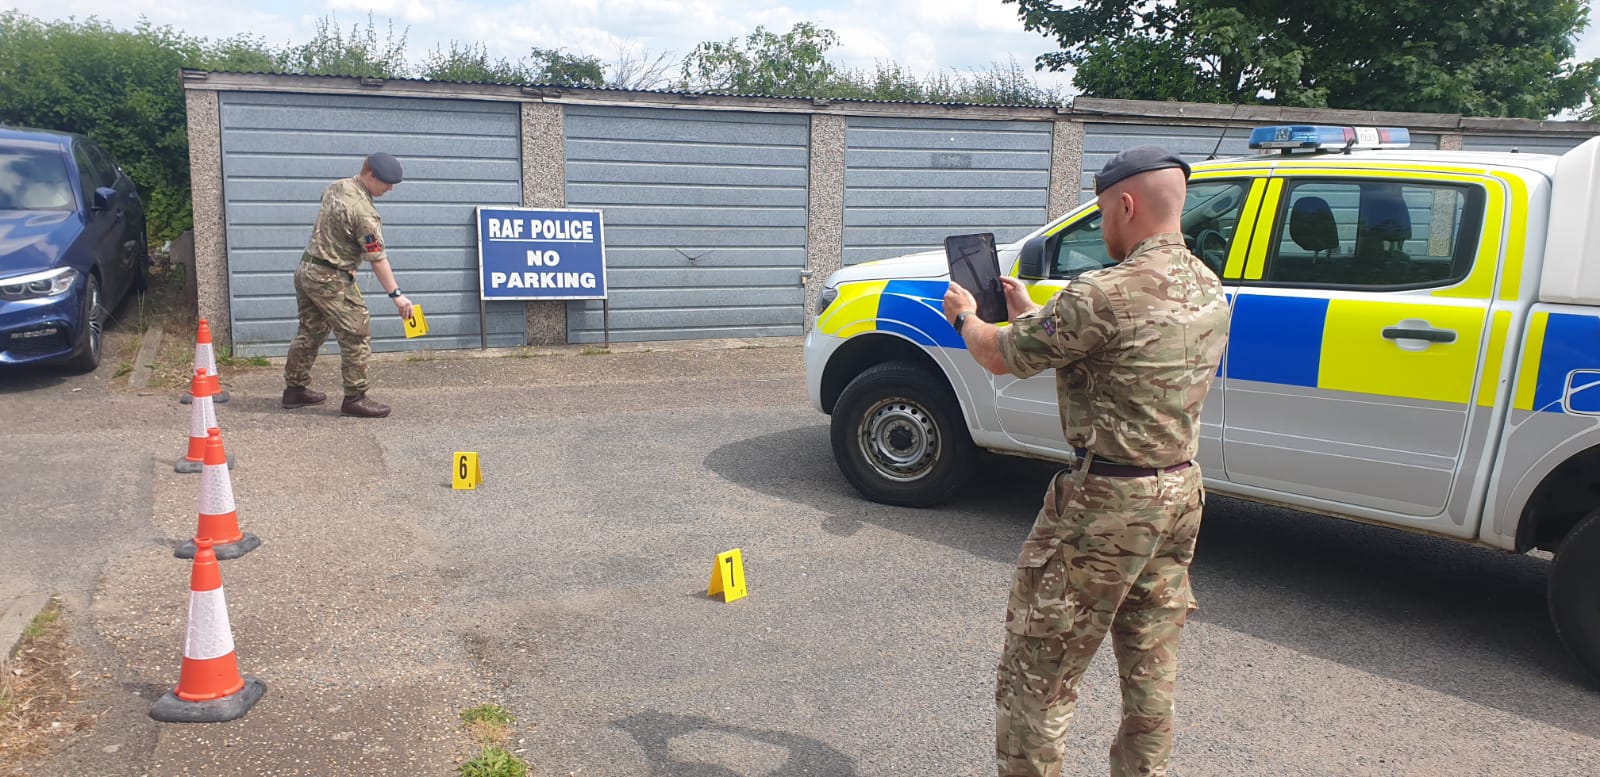 Image shows RAF Police placing numbered markers in a car park and recording it on a tablet device.